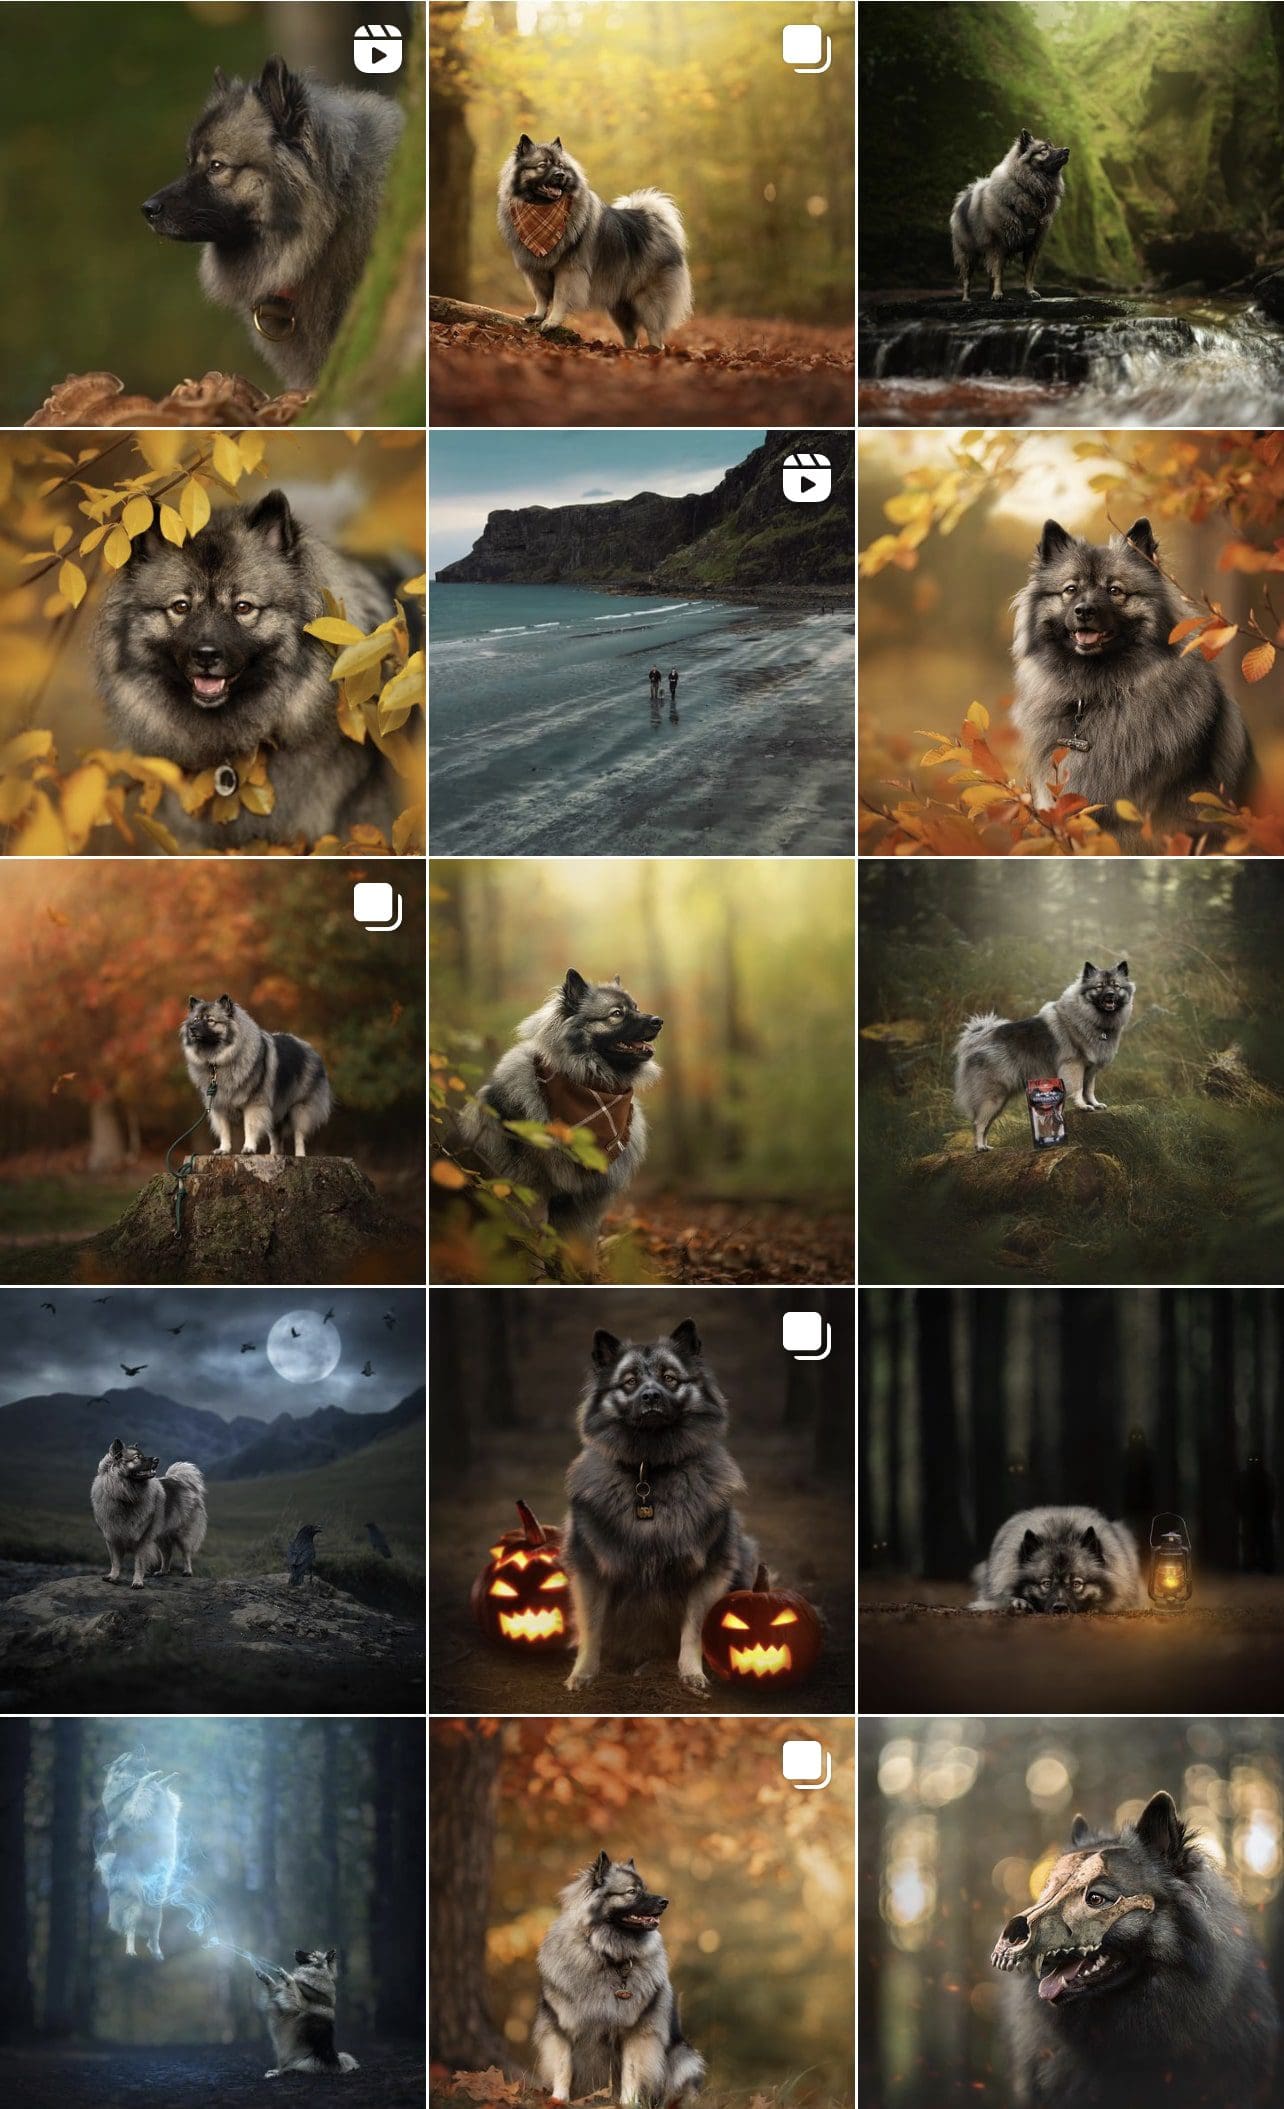 Keira the Keeshond on Instagram